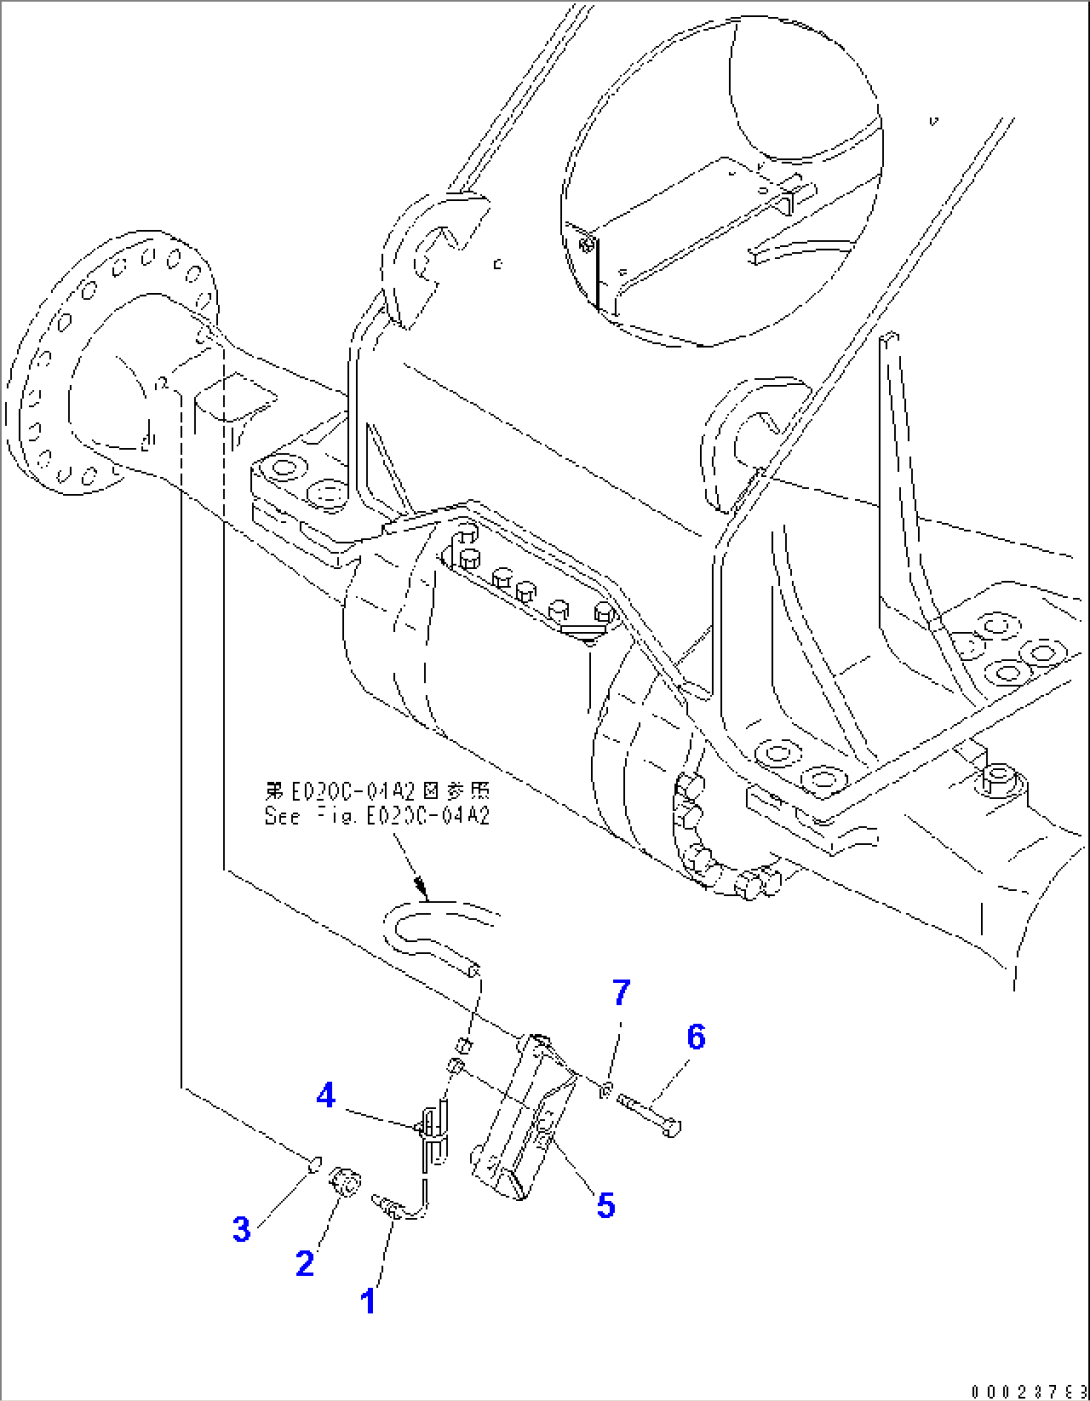 FRONT HARNESS (AXLE HARNESS) (WITH VHMS)(#51001-)